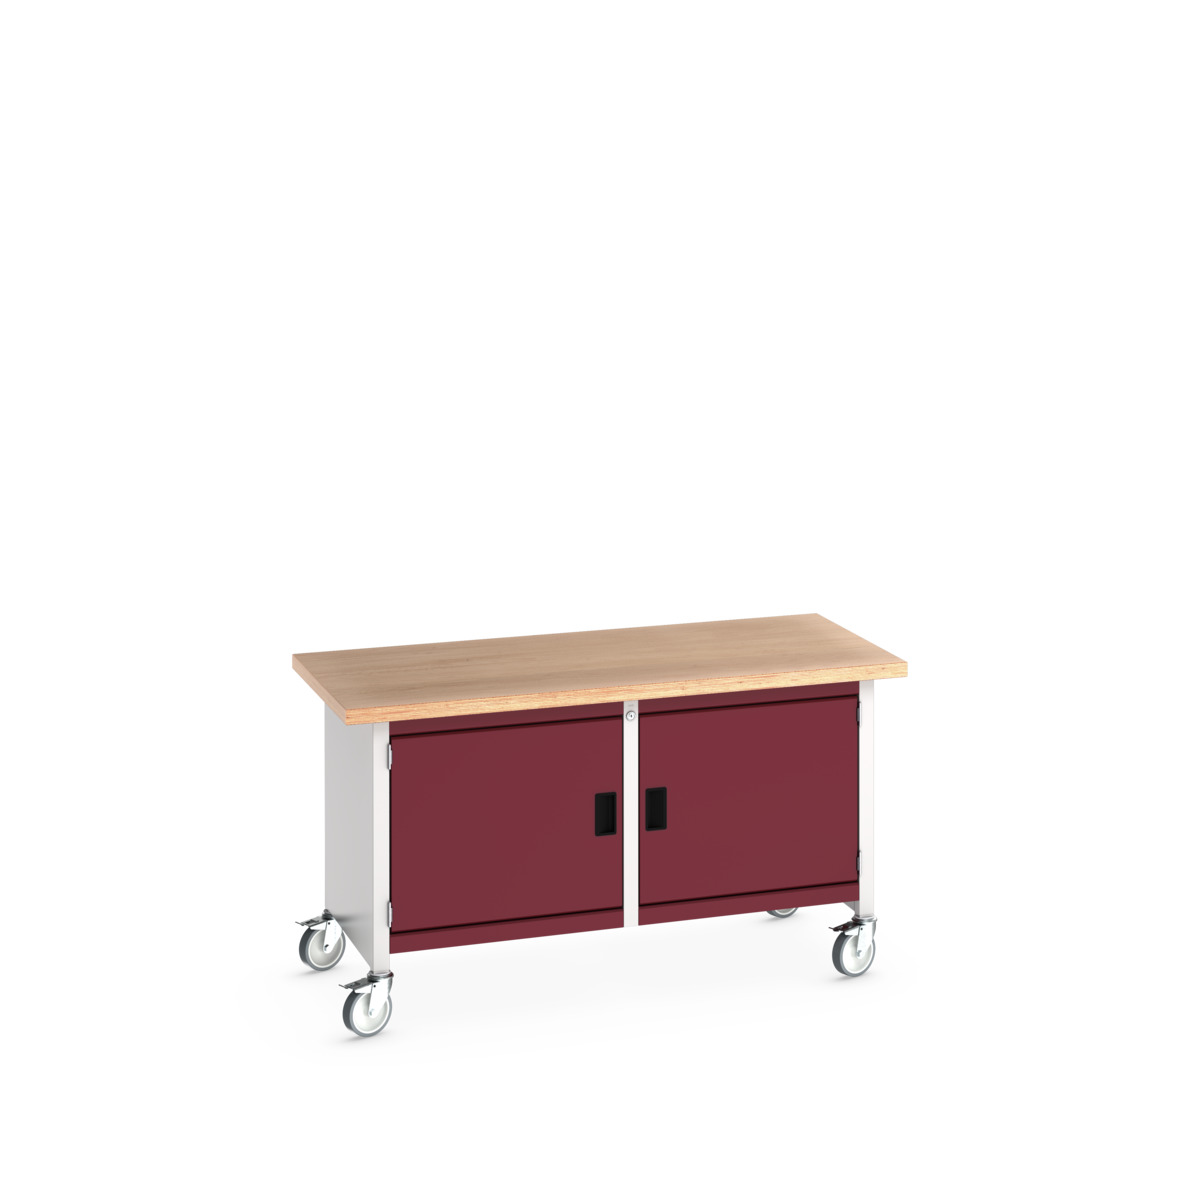 41002097.24V - cubio mobile storage bench (mpx)